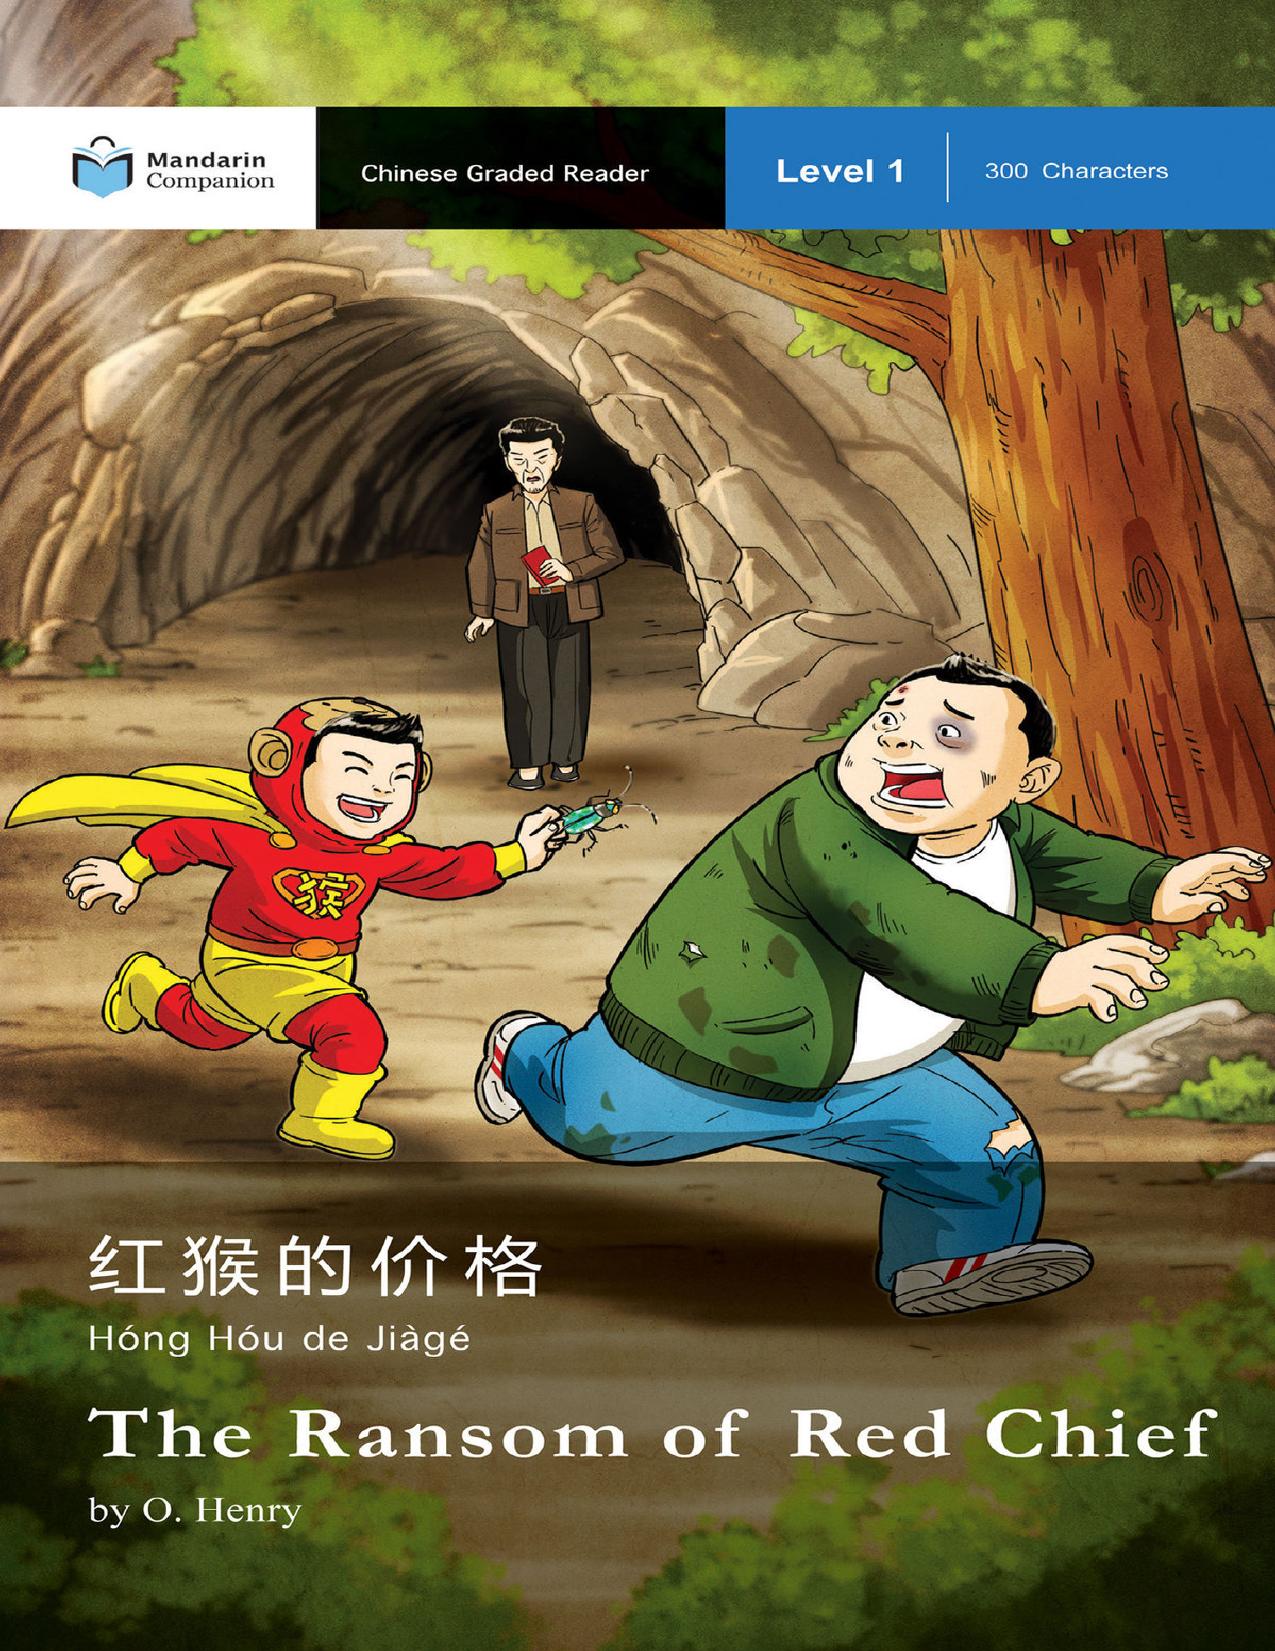 The Ransom of Red Chief: Mandarin Companion Graded Readers: Level 1, Simplified Chinese Edition by O. Henry